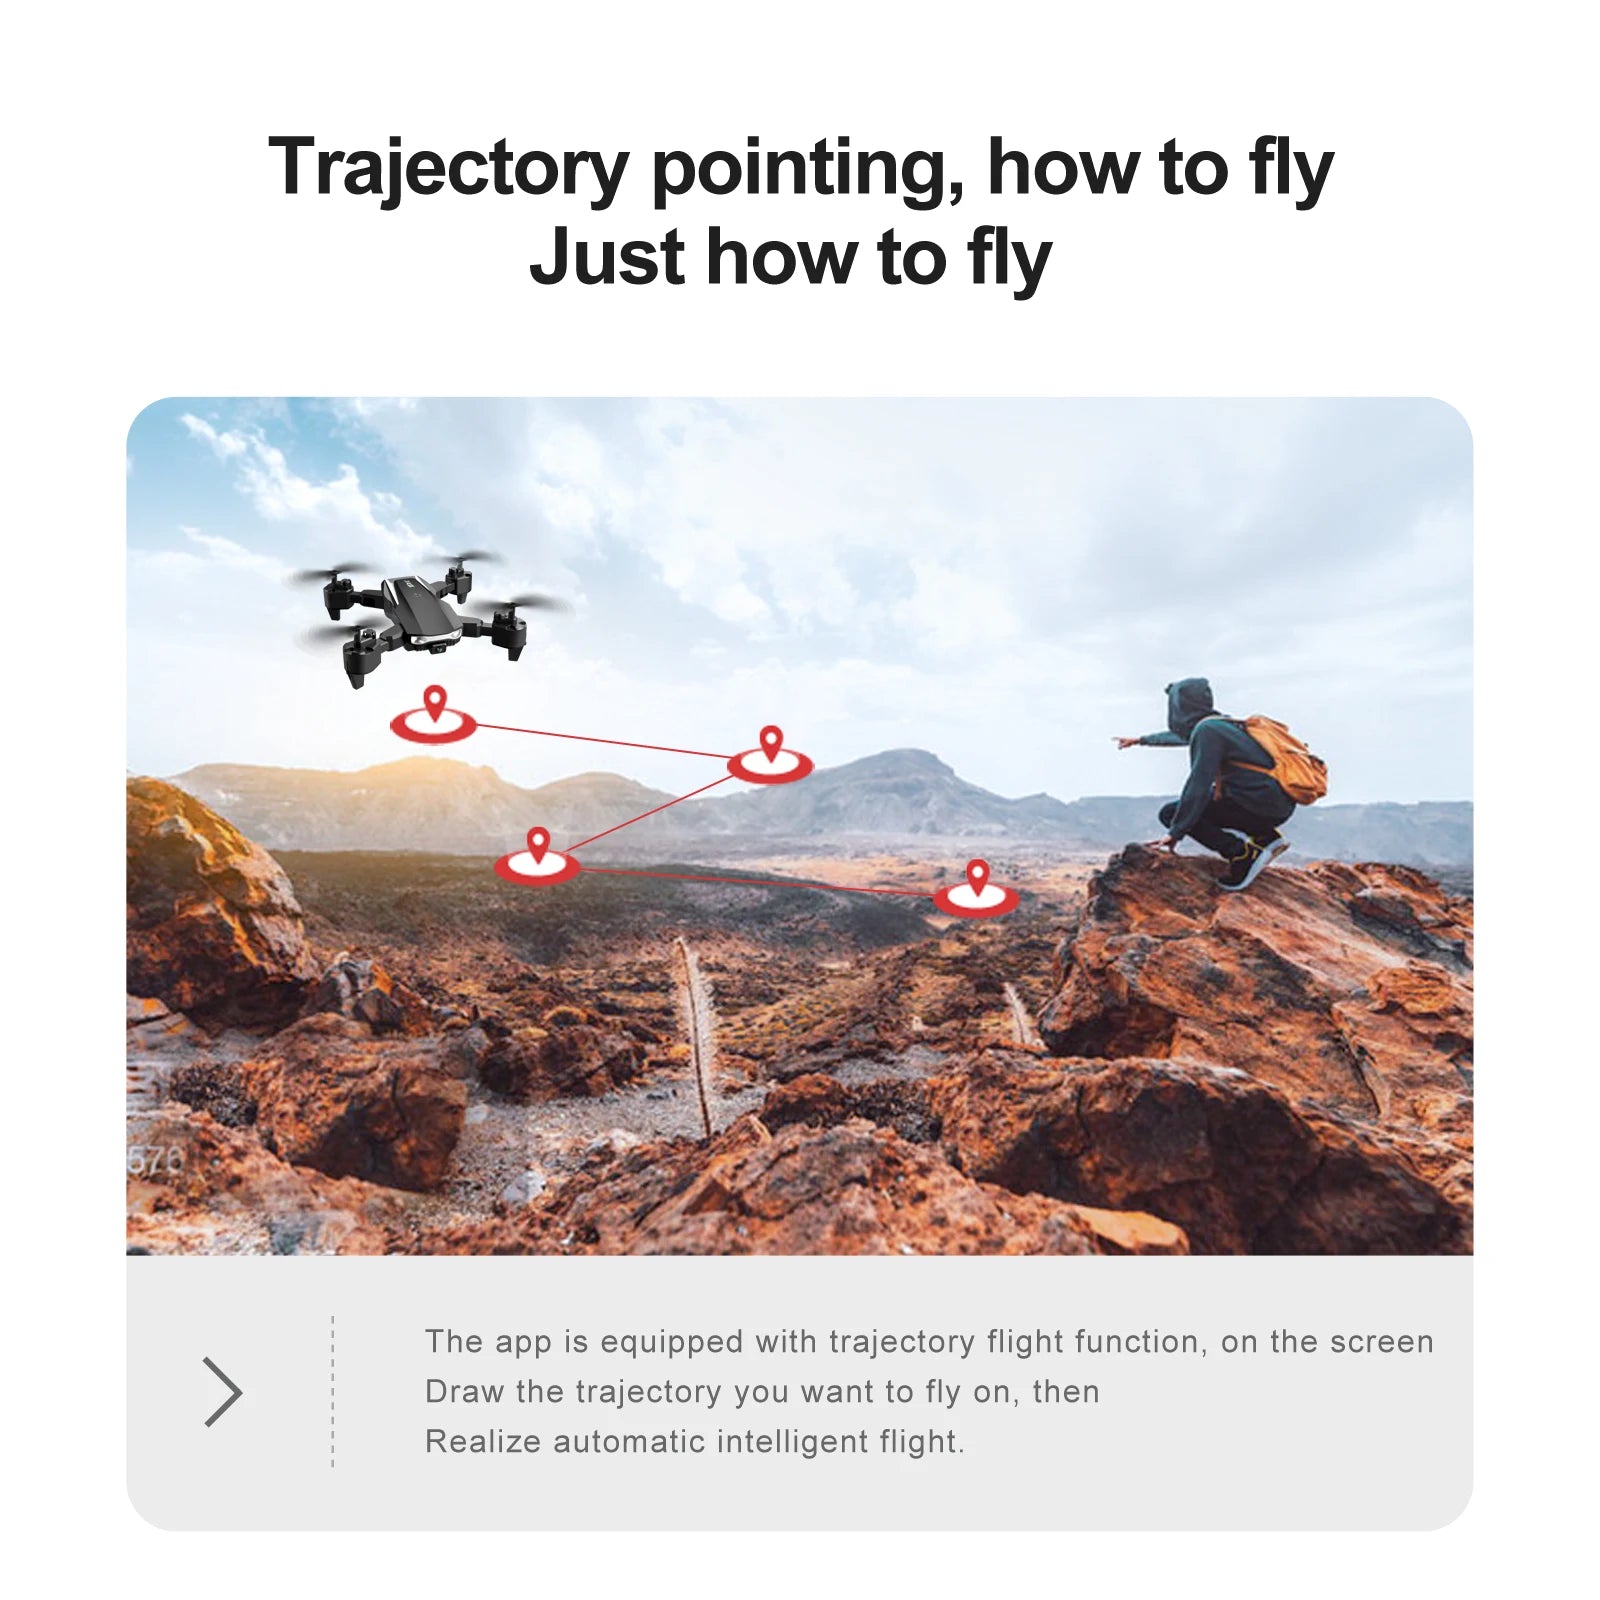 S90 Mini Drone, the app is equipped with trajectory flight function, on the screen draw the